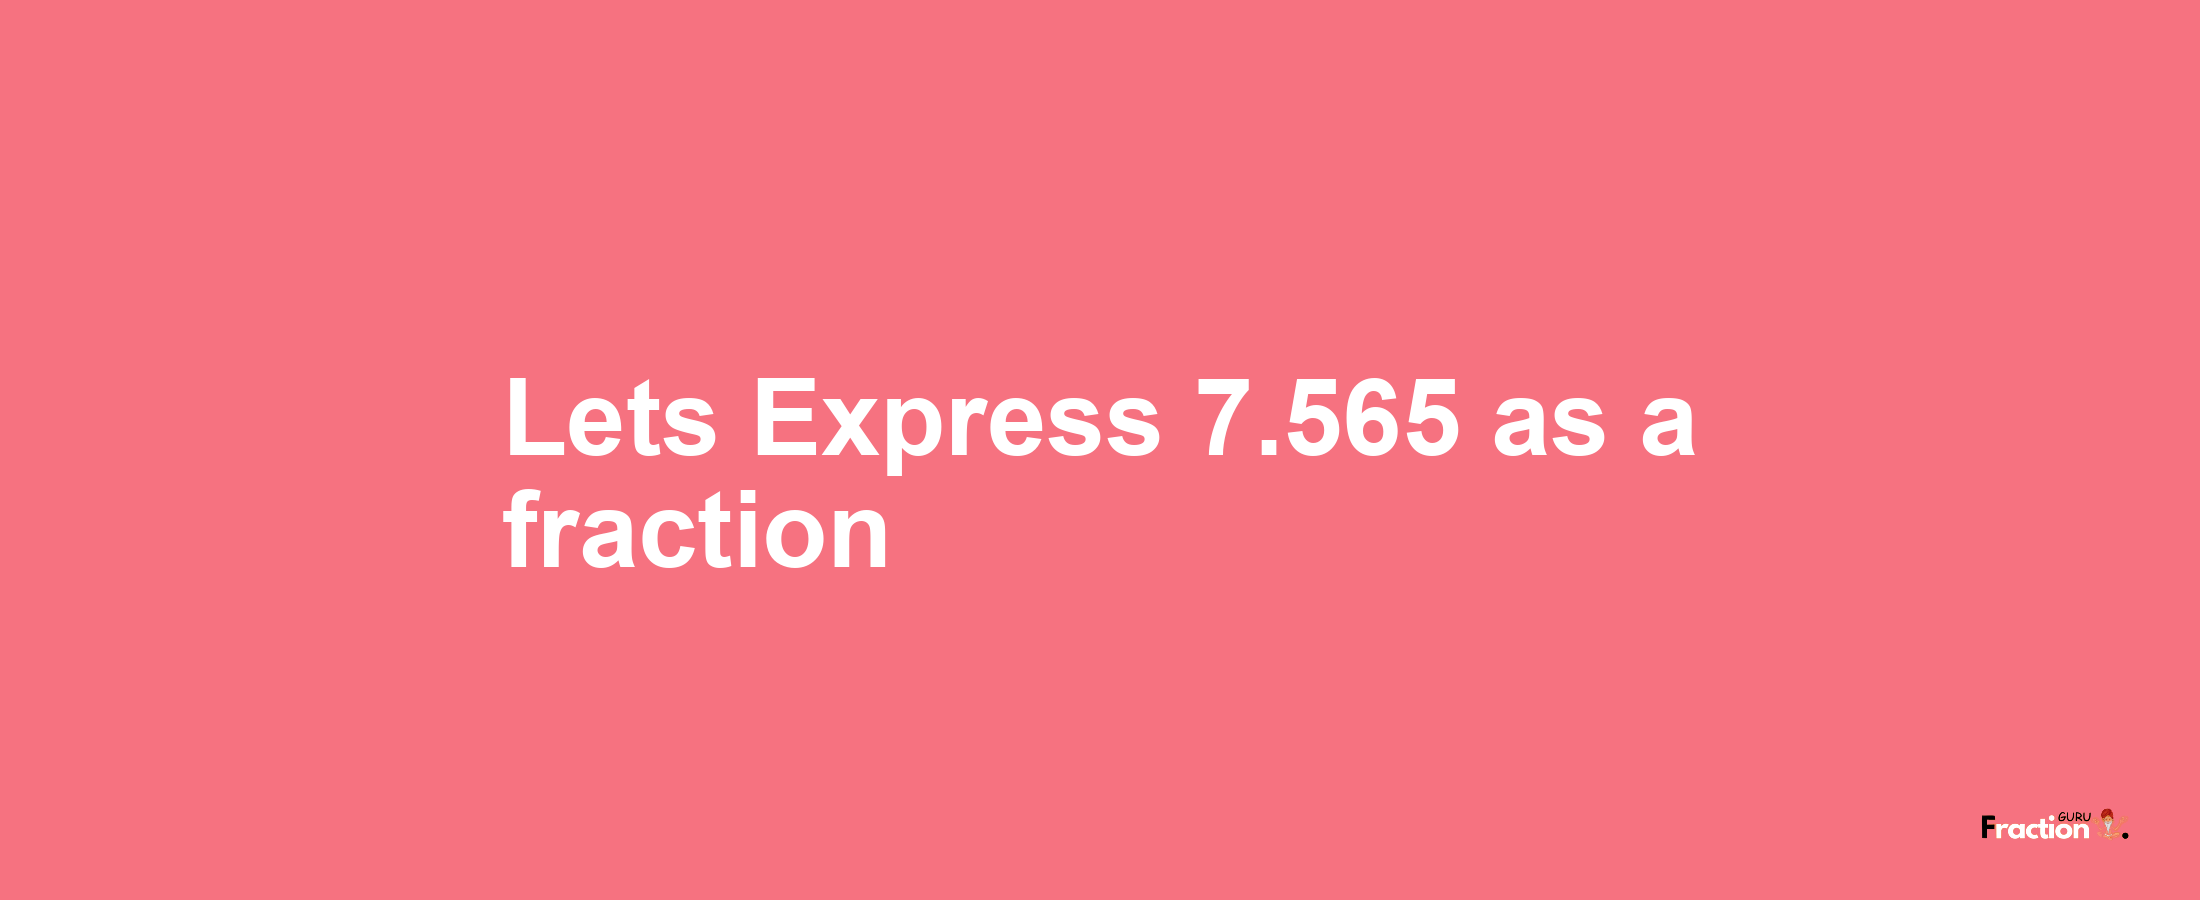 Lets Express 7.565 as afraction